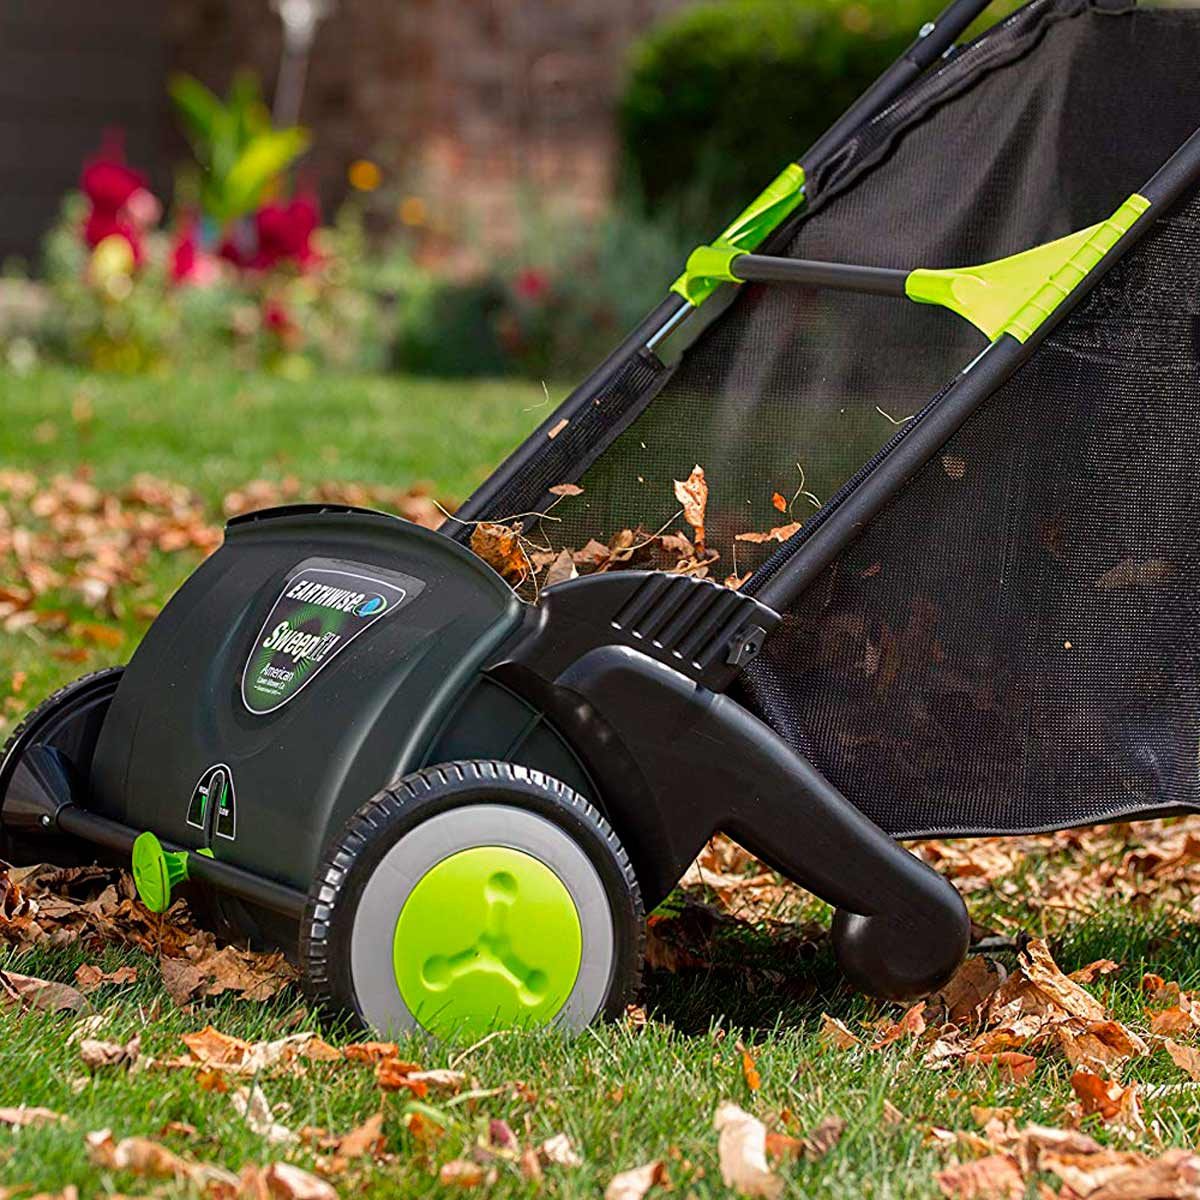 Lawn Sweepers: Worth It or Waste of Space?